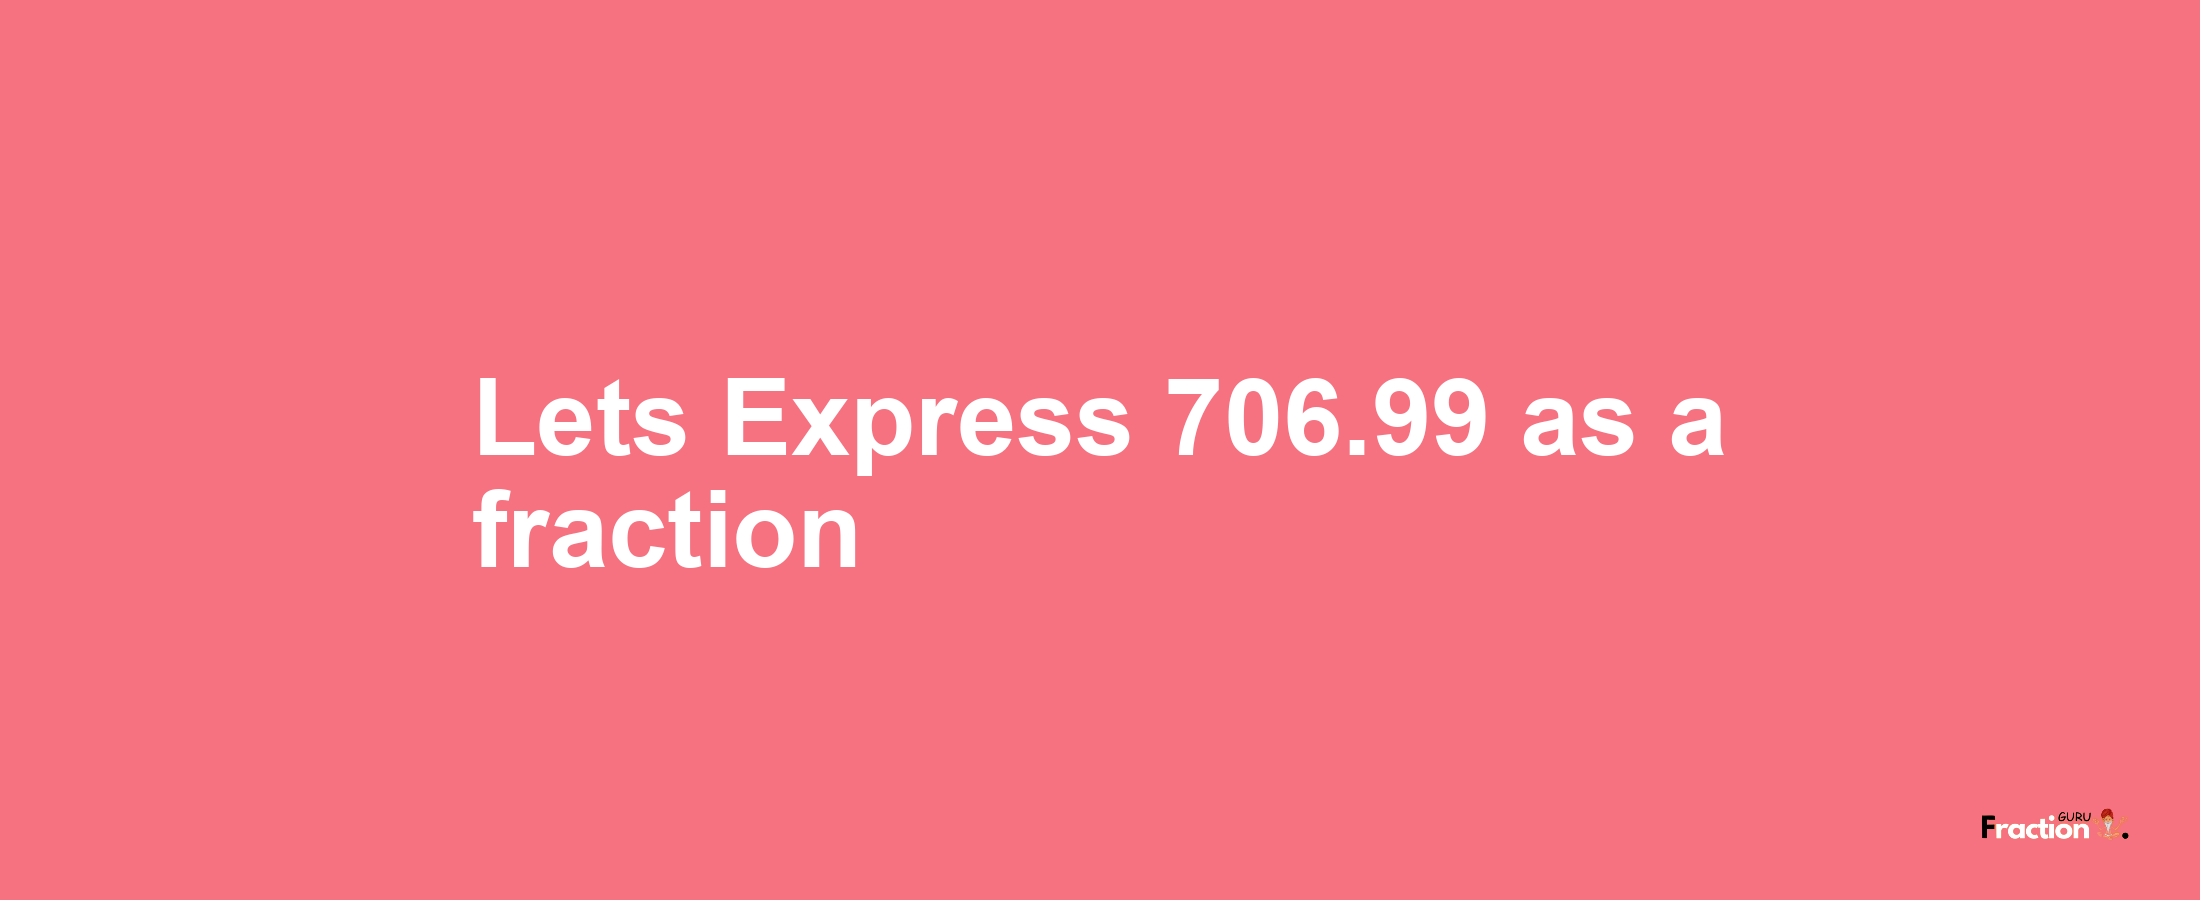 Lets Express 706.99 as afraction